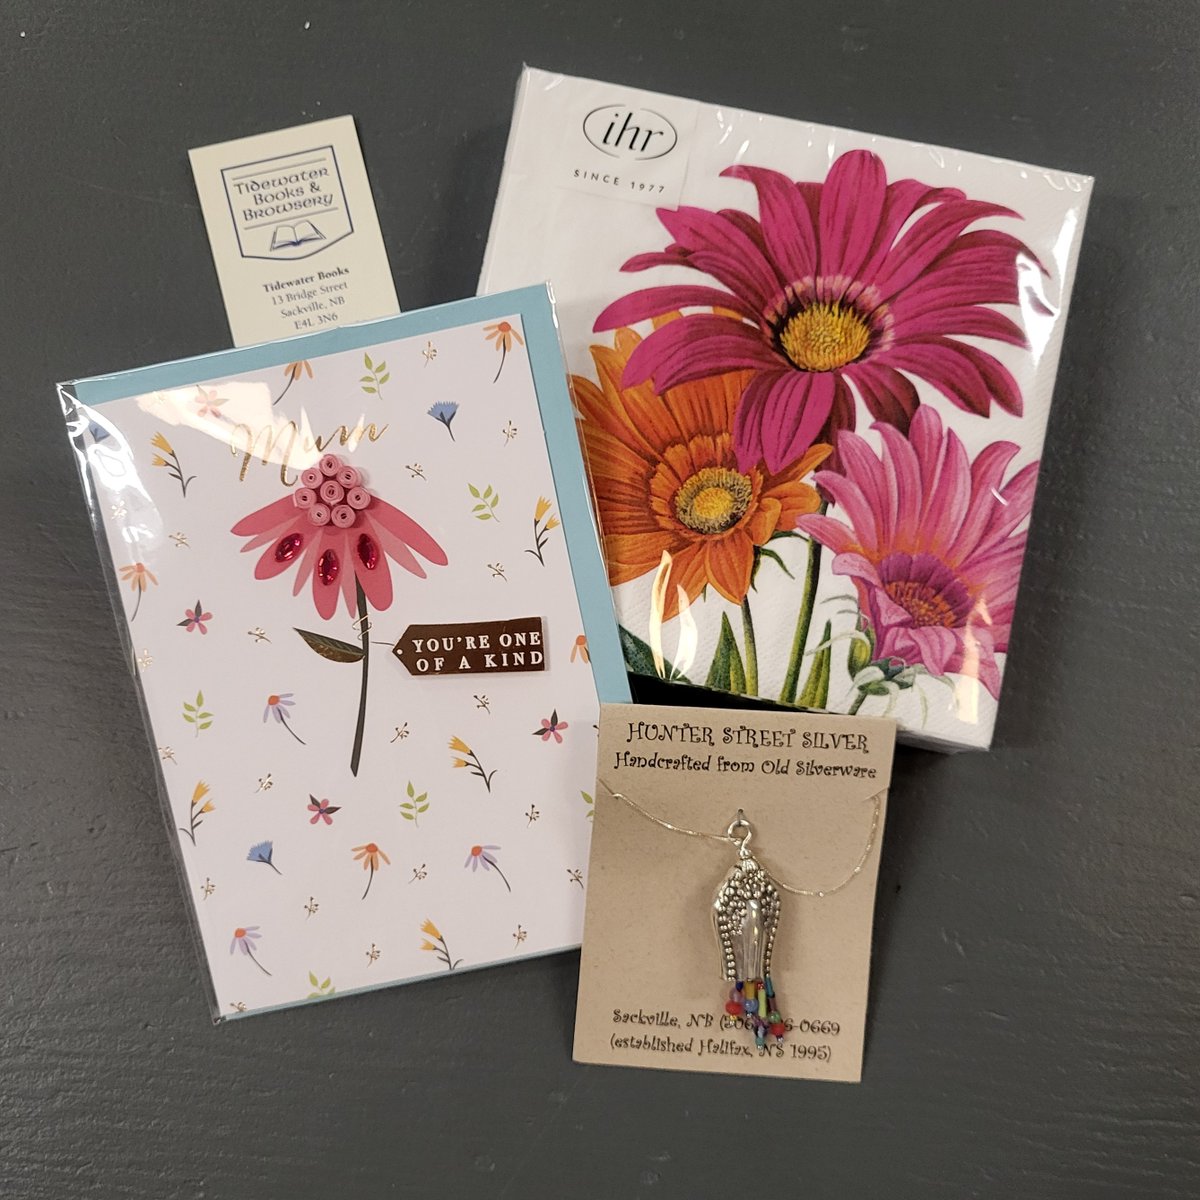 Sackville's own Hunter Street Silver @hunterstreetsilver jewelry pairs well with these cute napkins & #MothersDay #Card!

Visit us in person or online at tidewaterbooks.ca! 💕🇨🇦📚

#ShopSmall #ShopLocal #ShopNB #ShopIndie #IndieBookstores #SackvilleNB #Fallinlovewithlocal